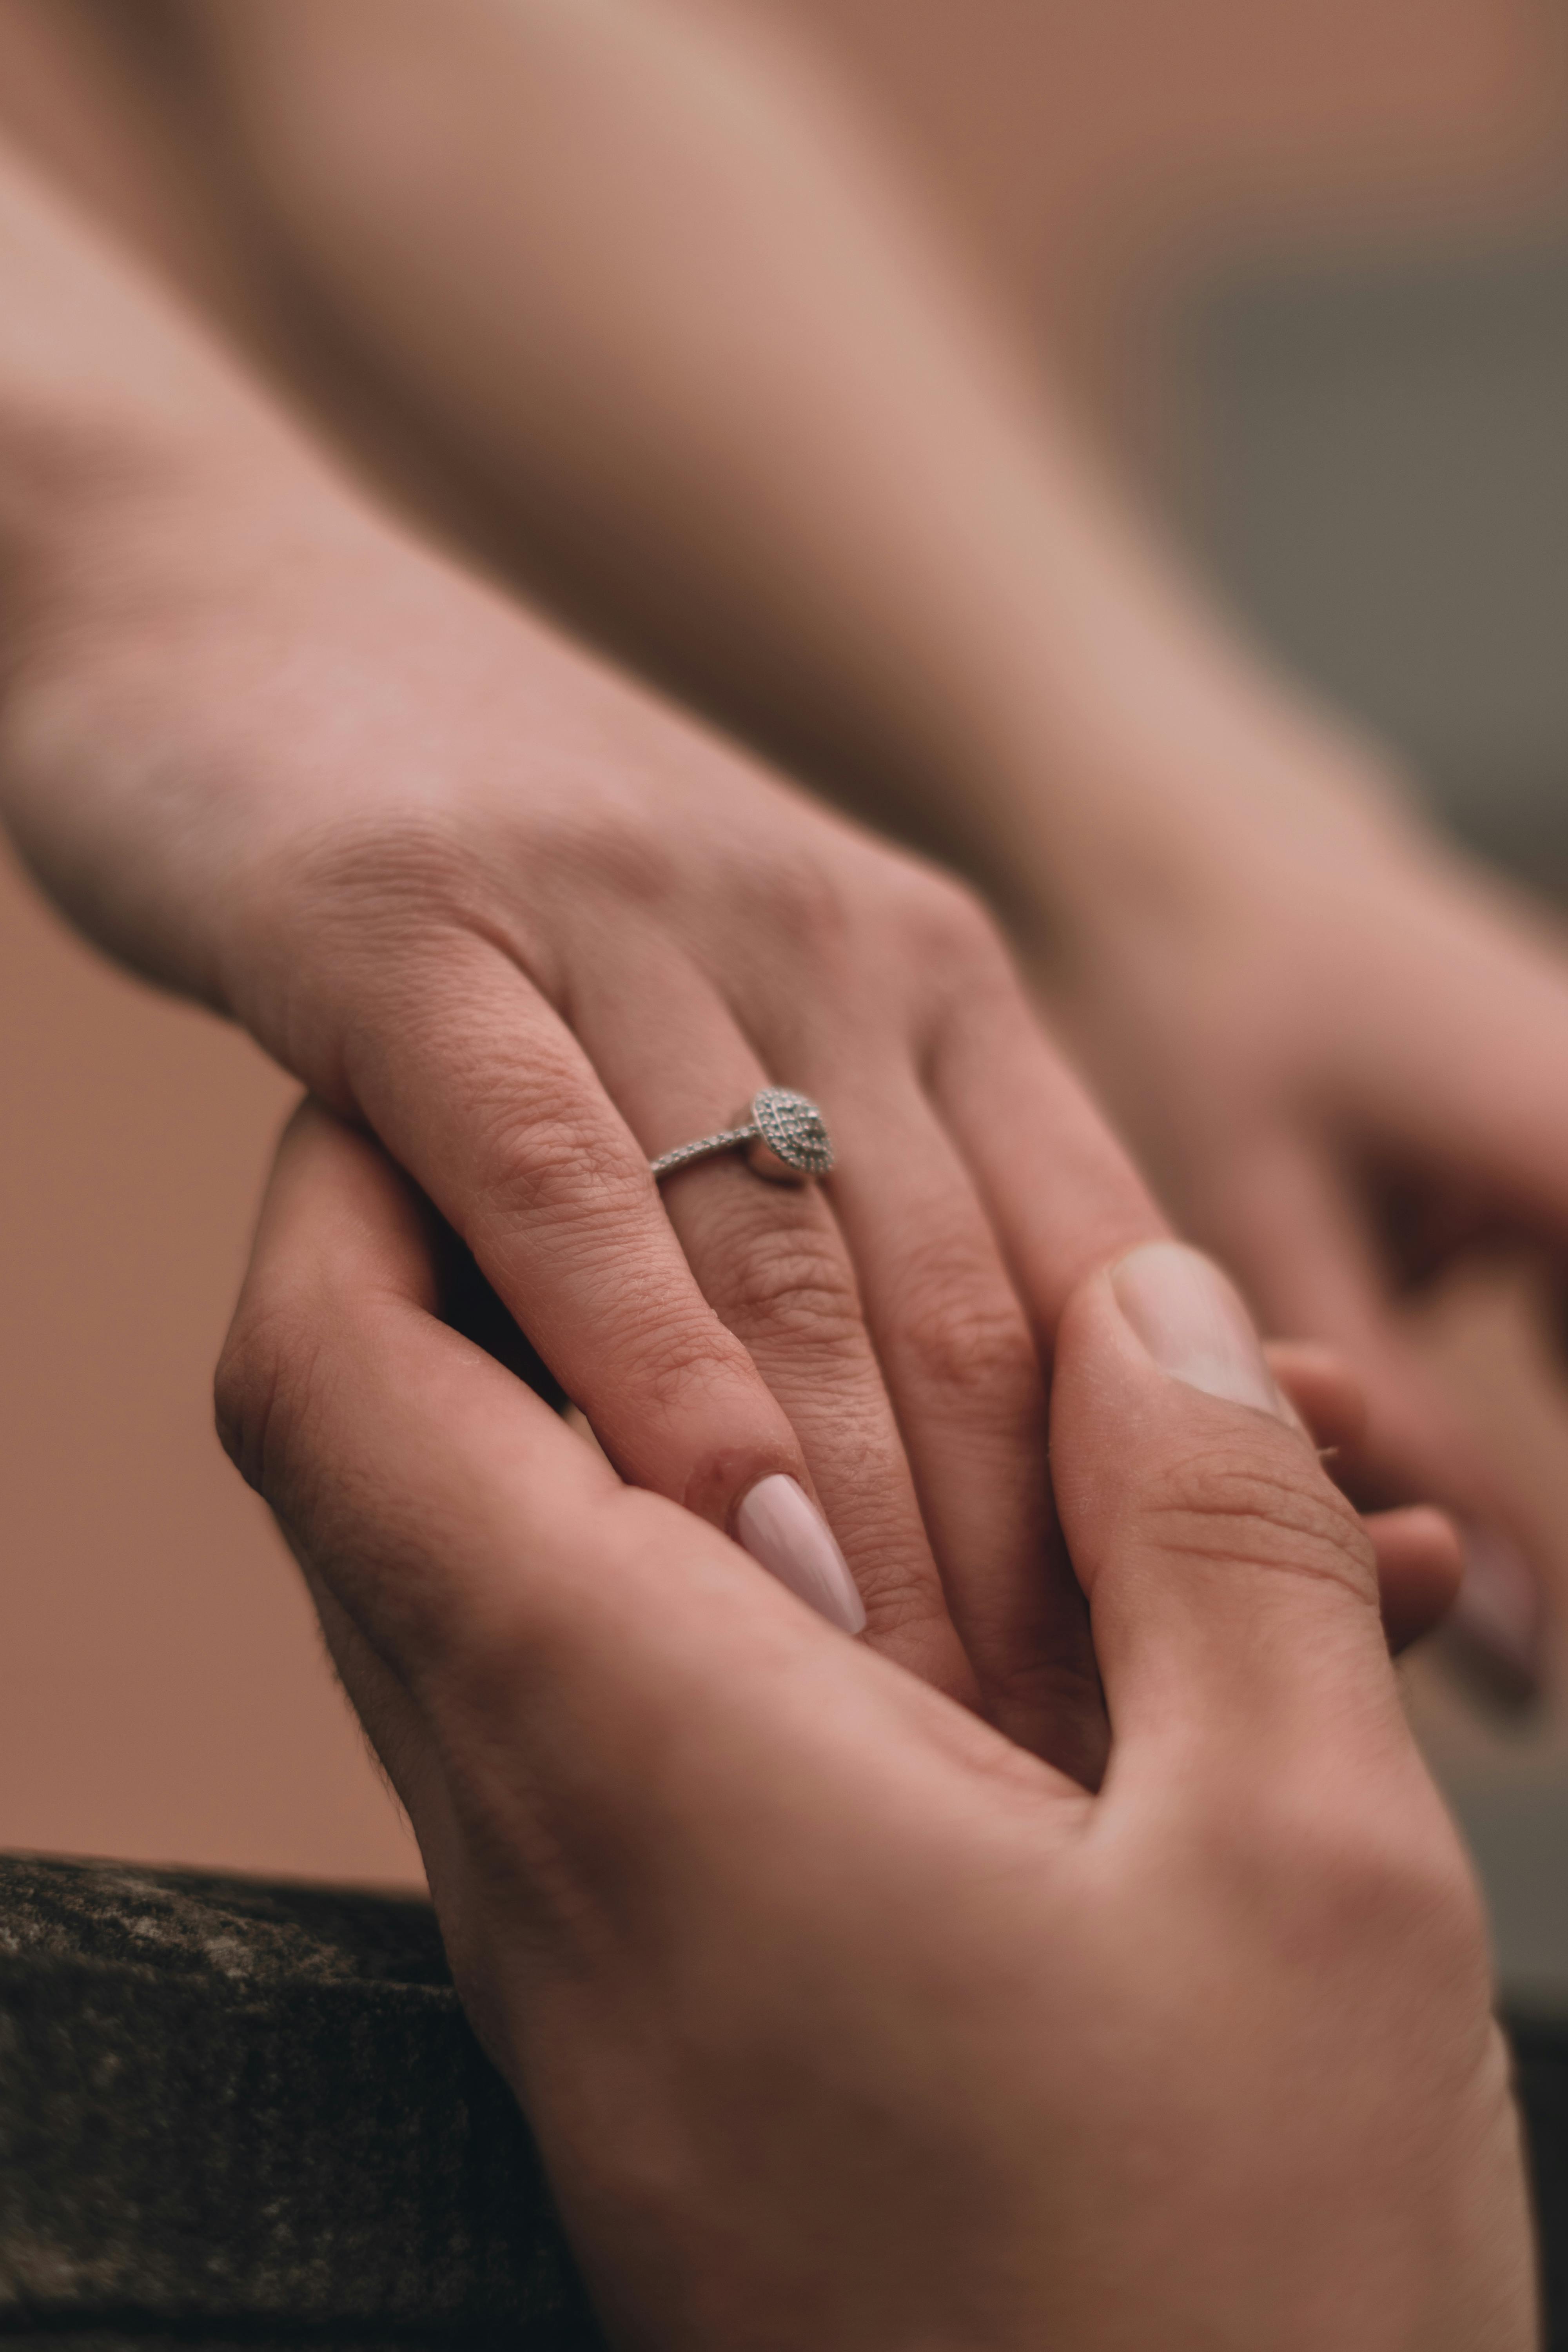 Crop man and woman hands with engagement rings · Free Stock Photo